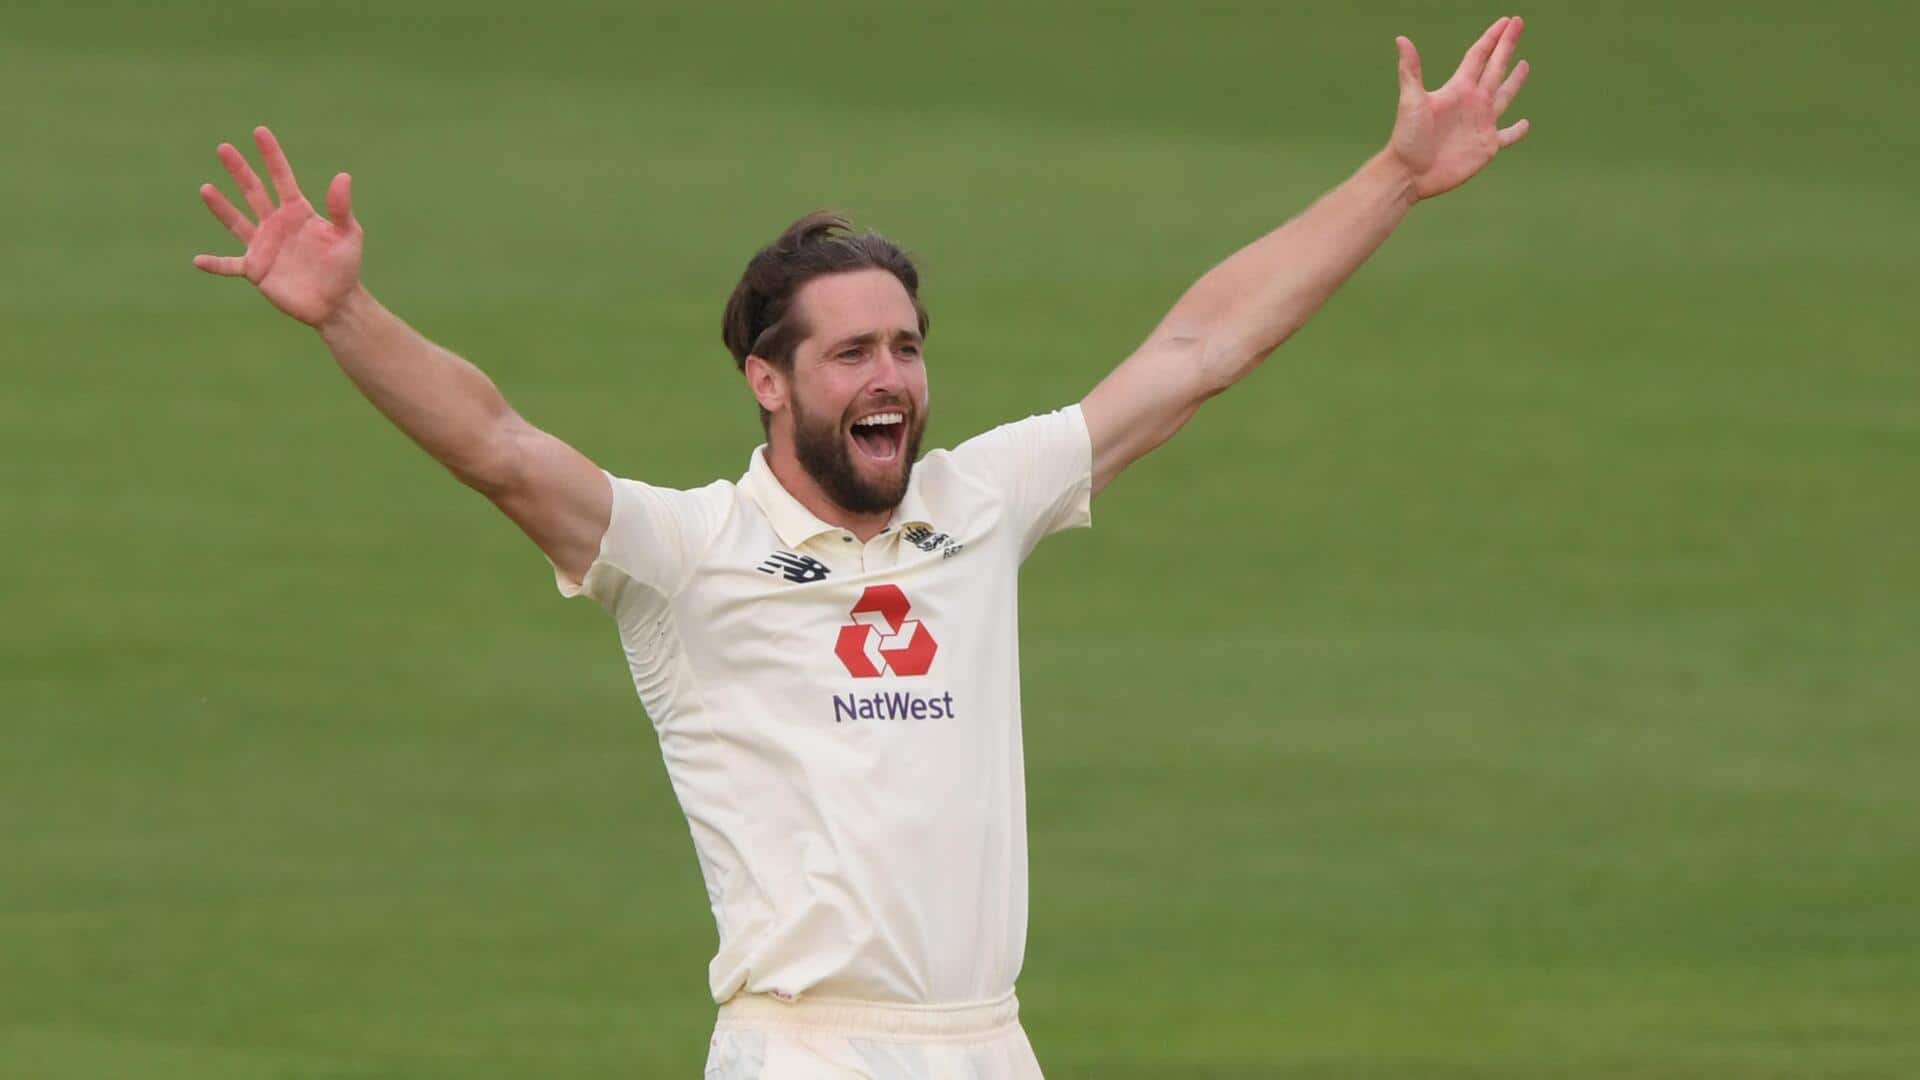 Chris Woakes attains this special milestone for England in Tests